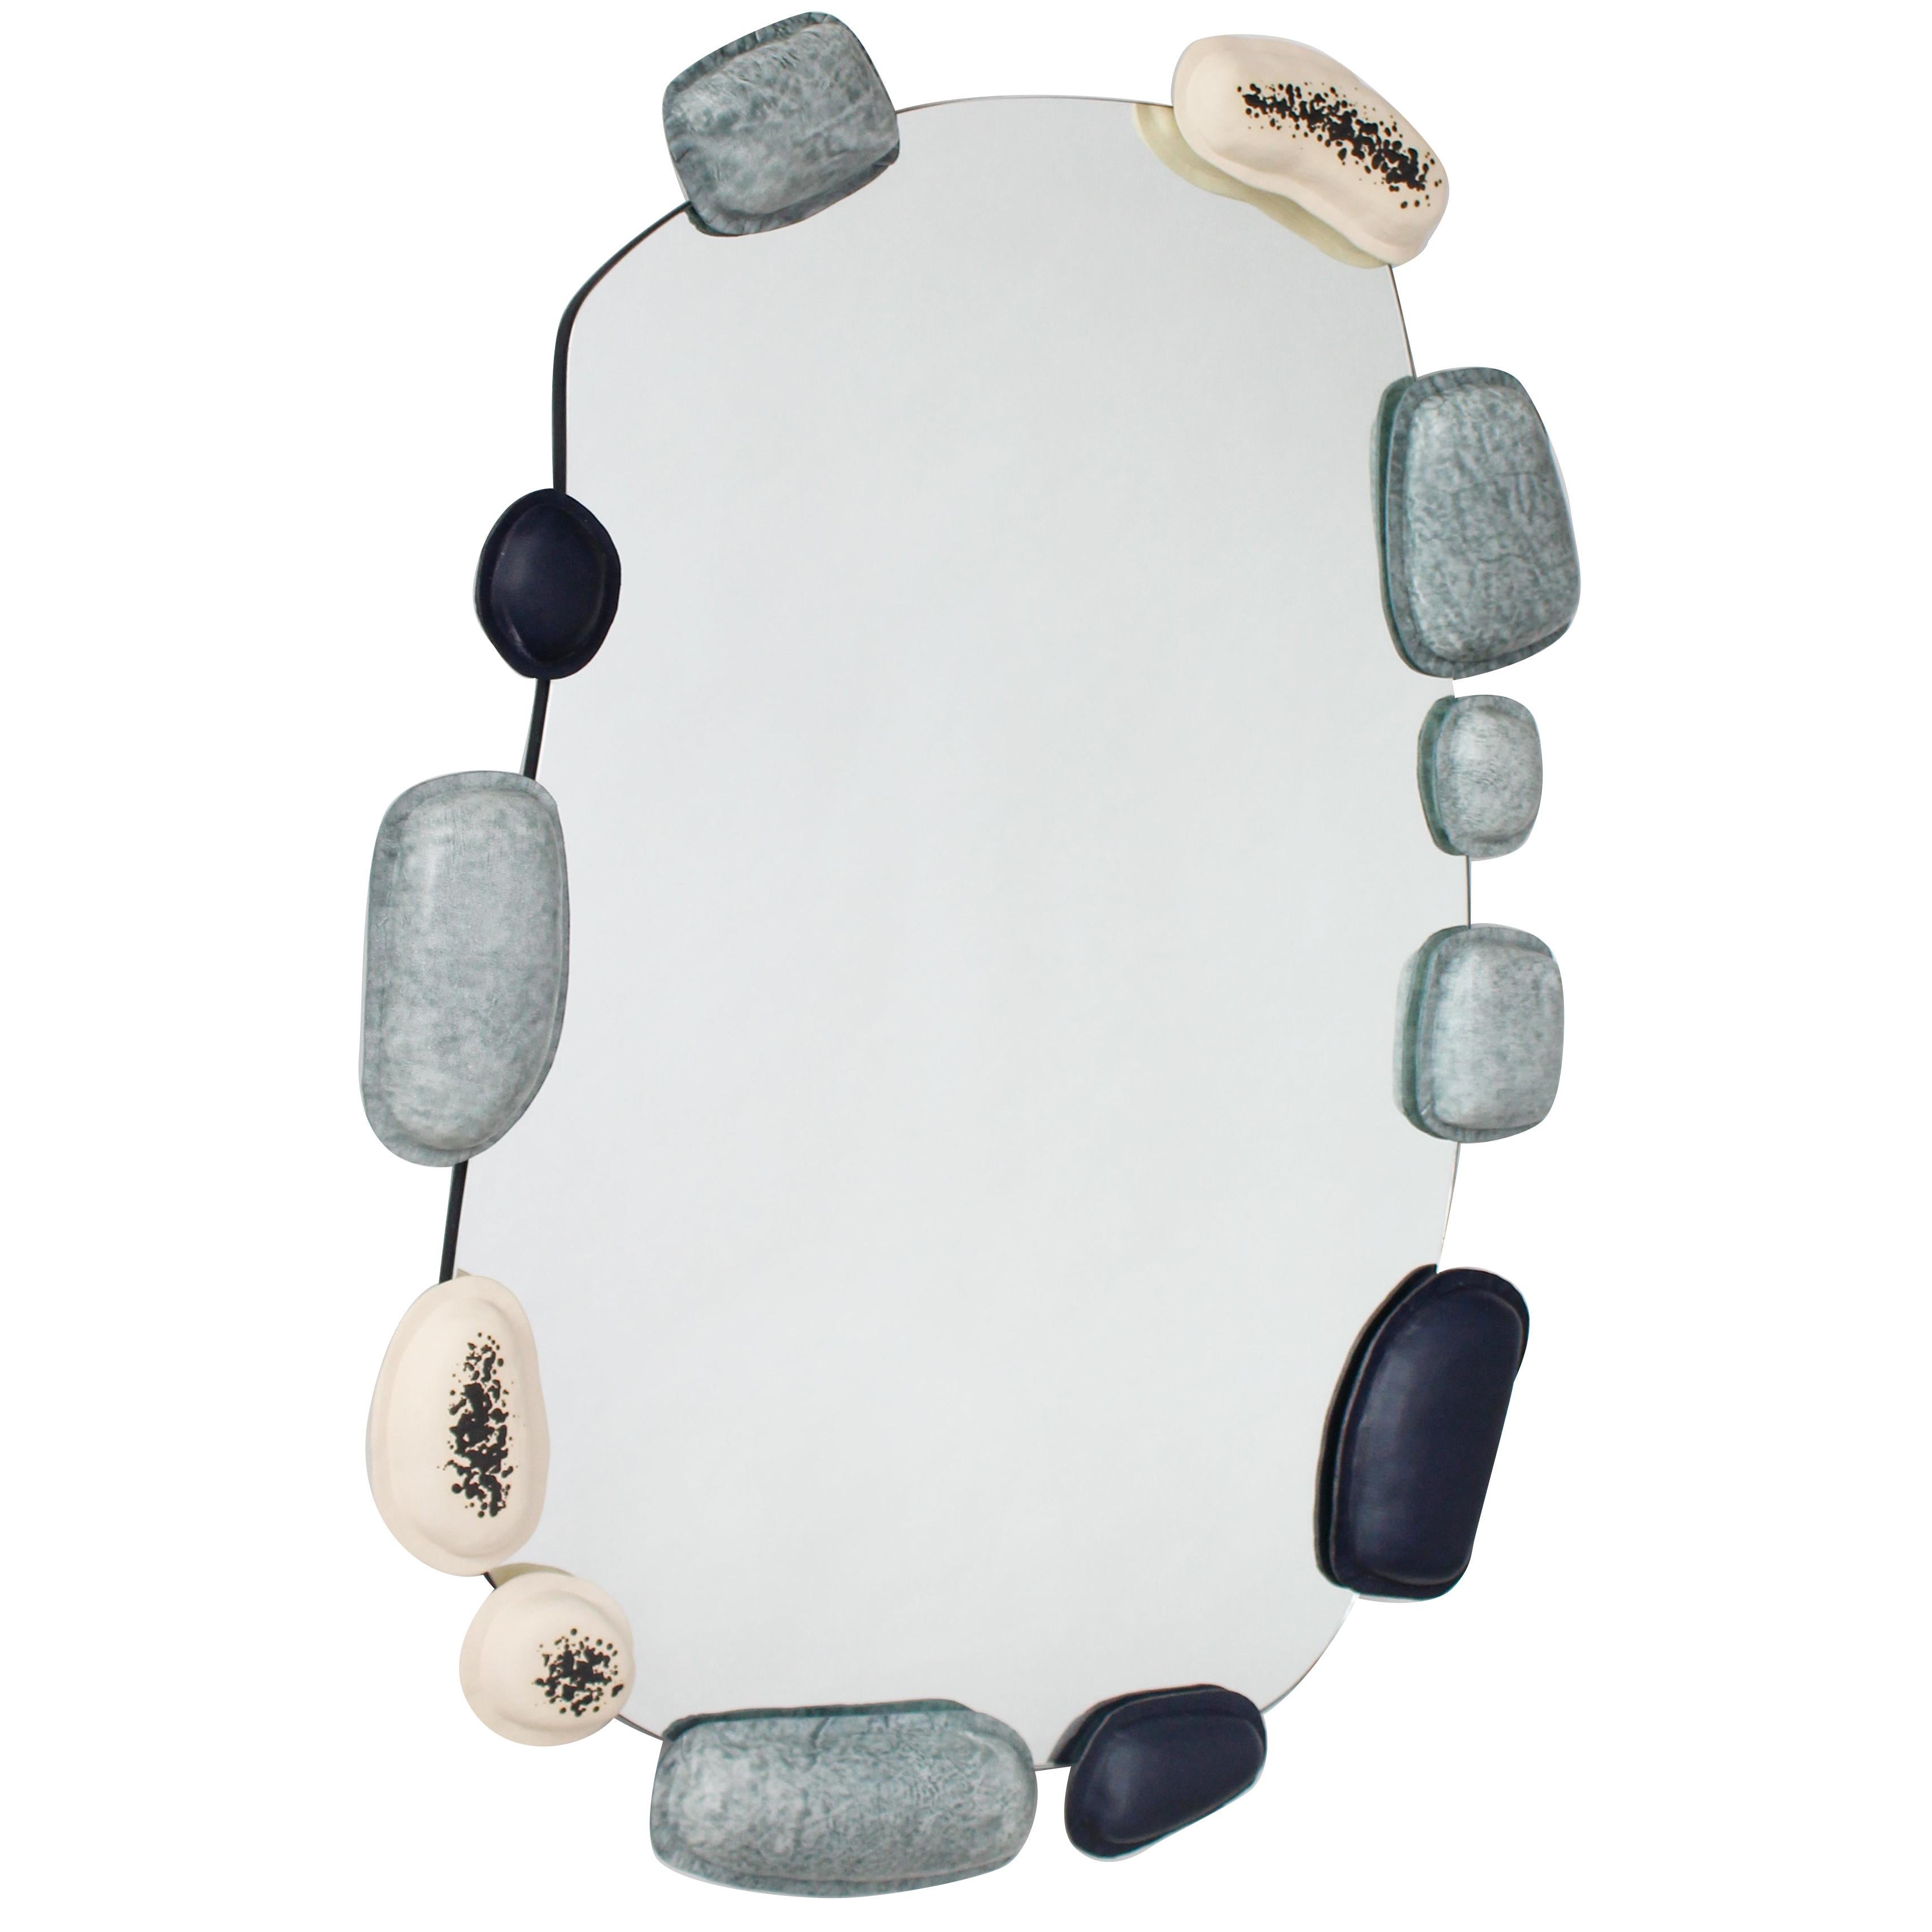 Colar Wall Mirror by Eny Lee Parker